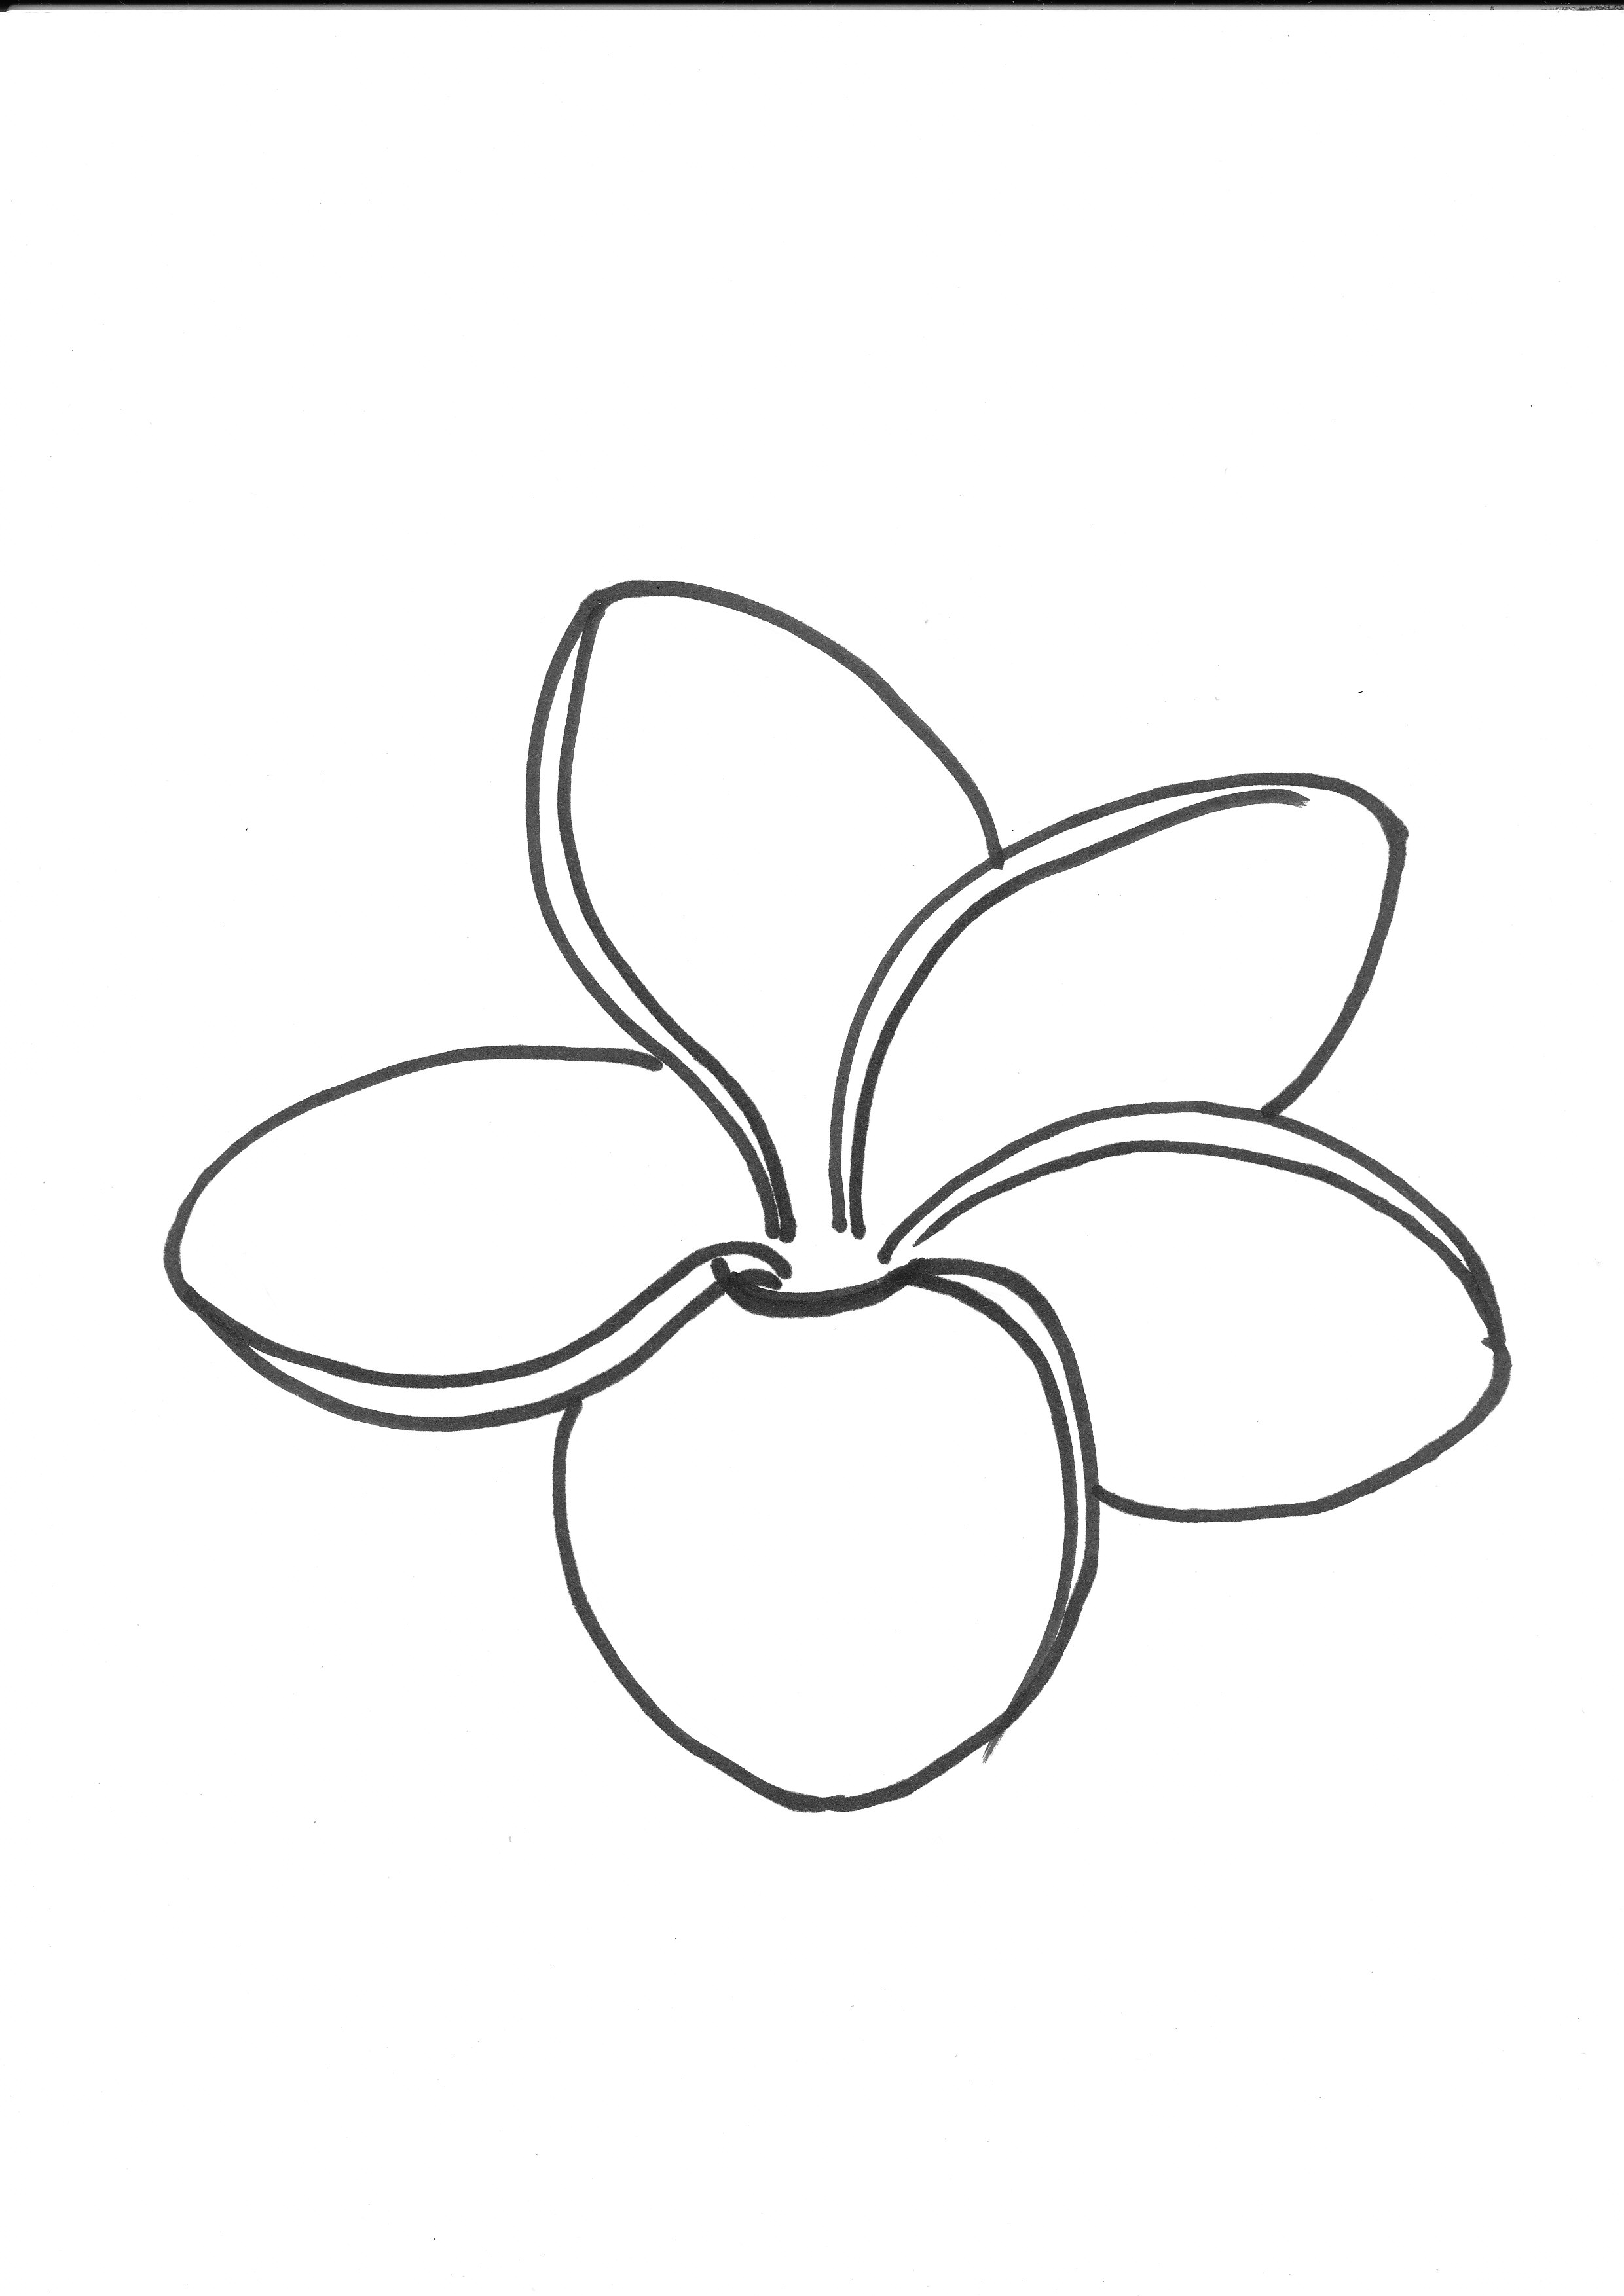  How To Draw A Frangipani Step By Step With Pictures in the world Learn more here 